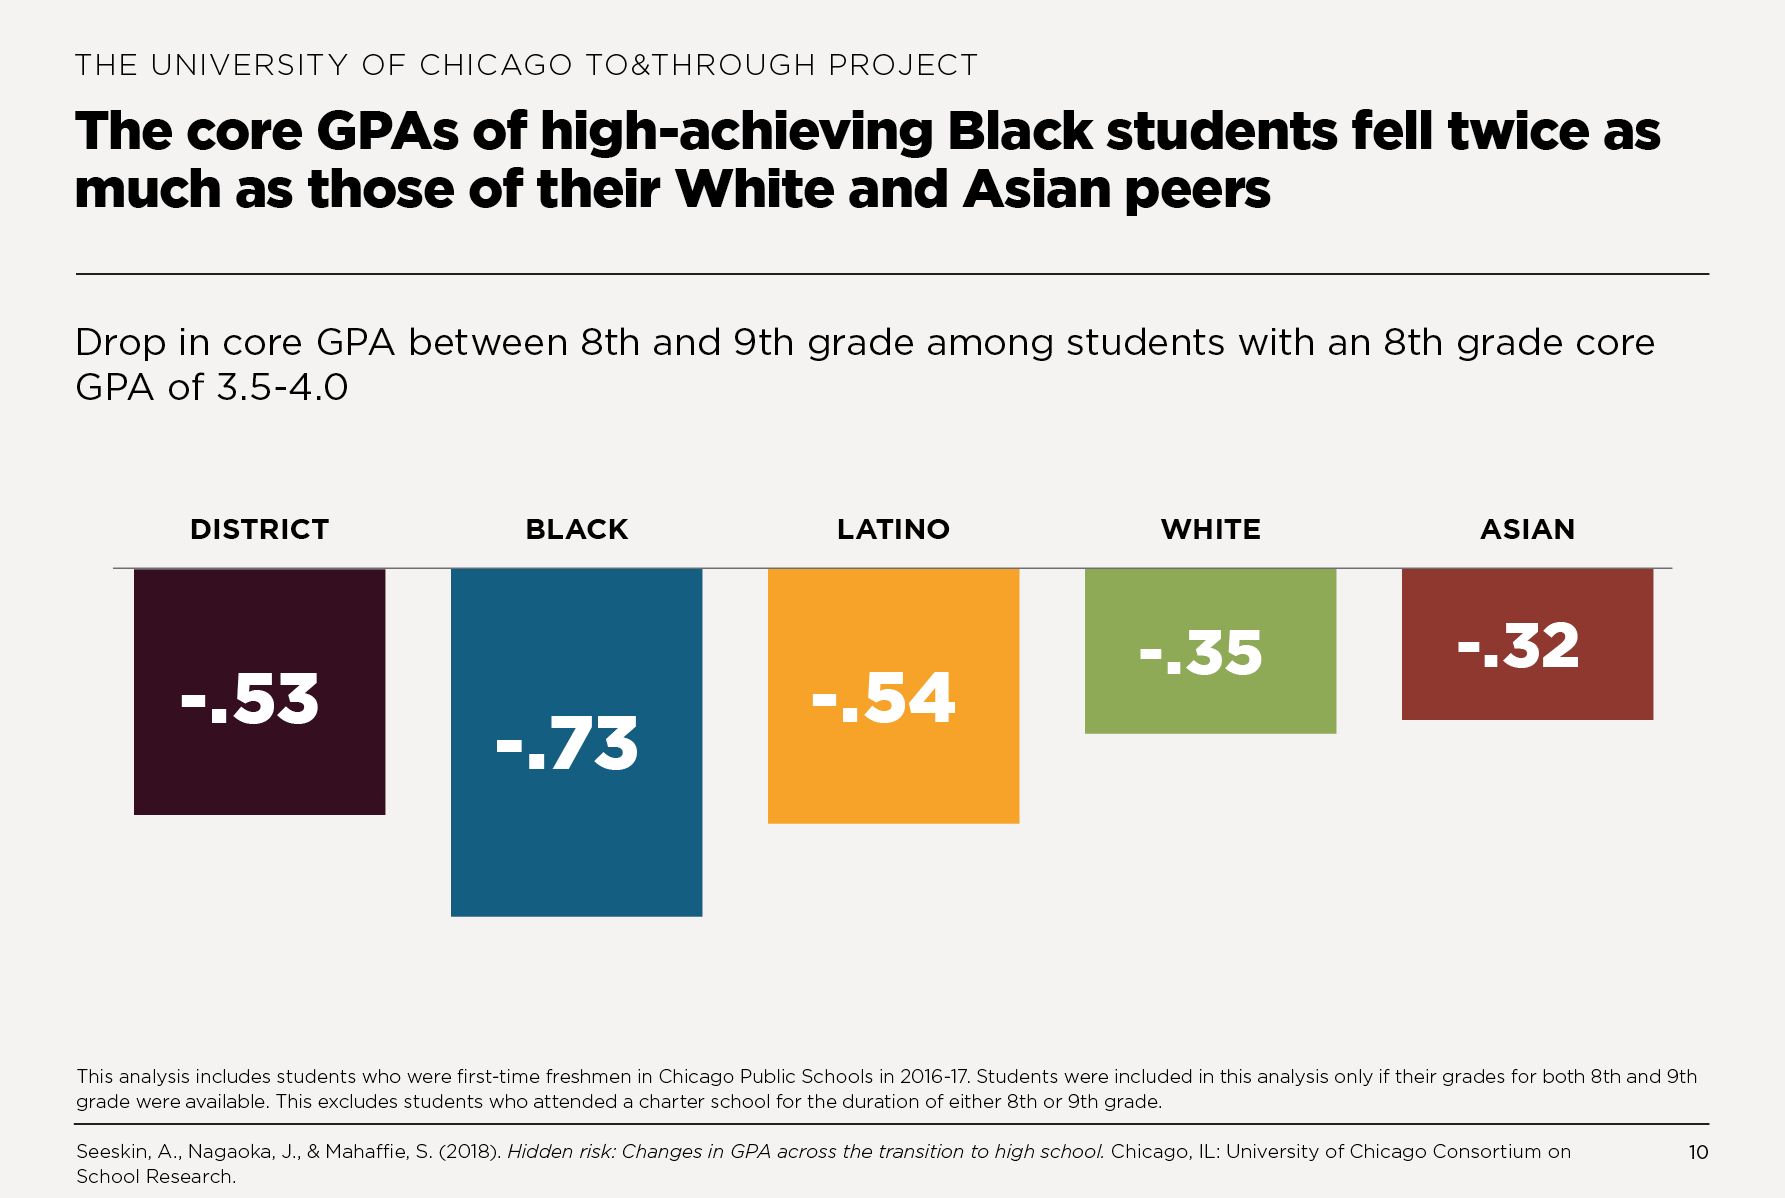 The core GPAs of high-achieving Black students fell twice as much as those of their White and Asian peers 